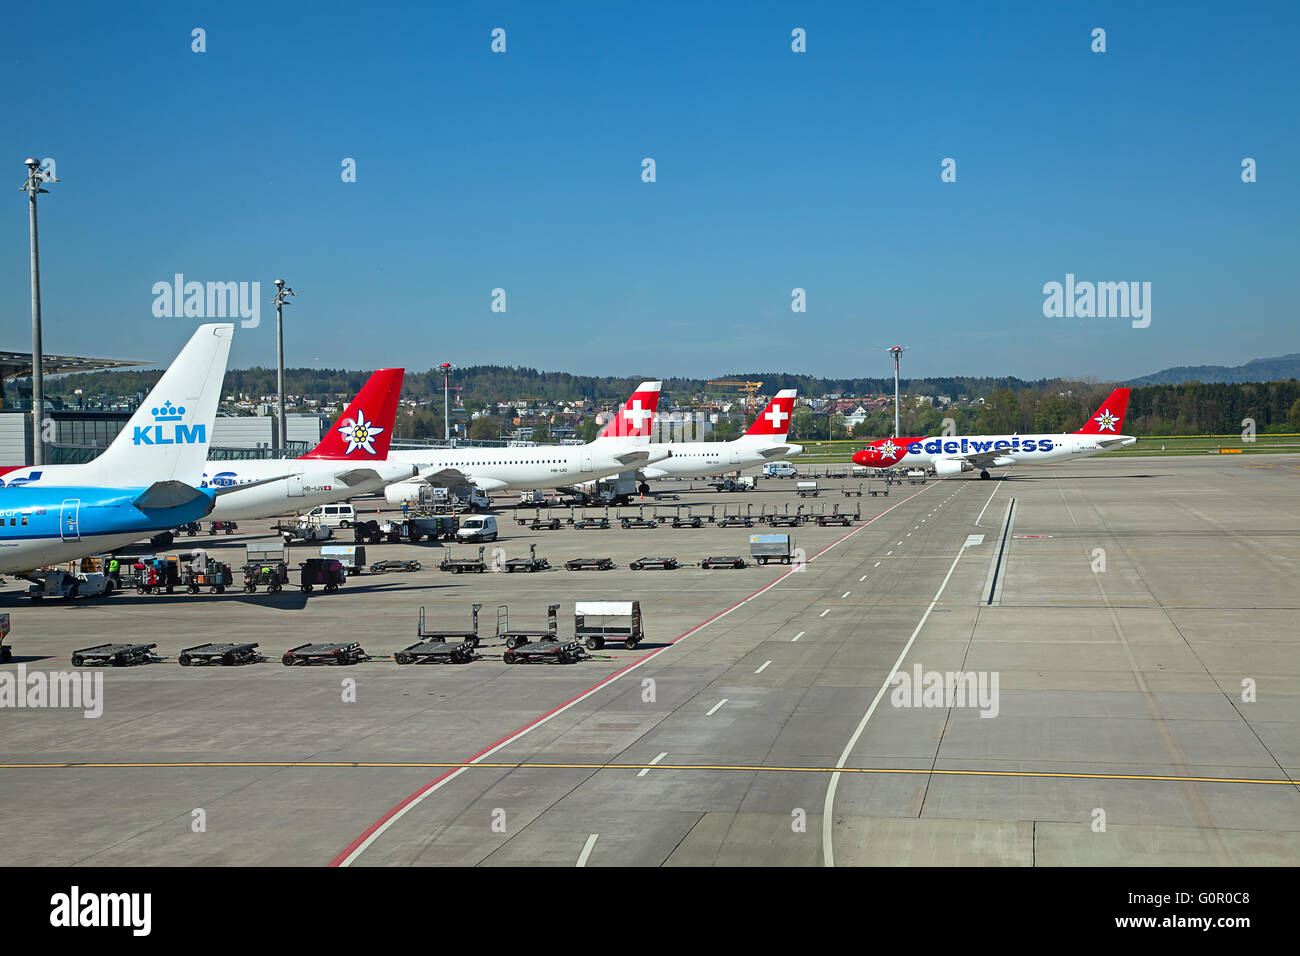 ZURICH - APRIL 14: Runways of the Zurich airport on April 14, 2014 in Zurich, Switzerland. Zurich airport is home port for Swiss Stock Photo